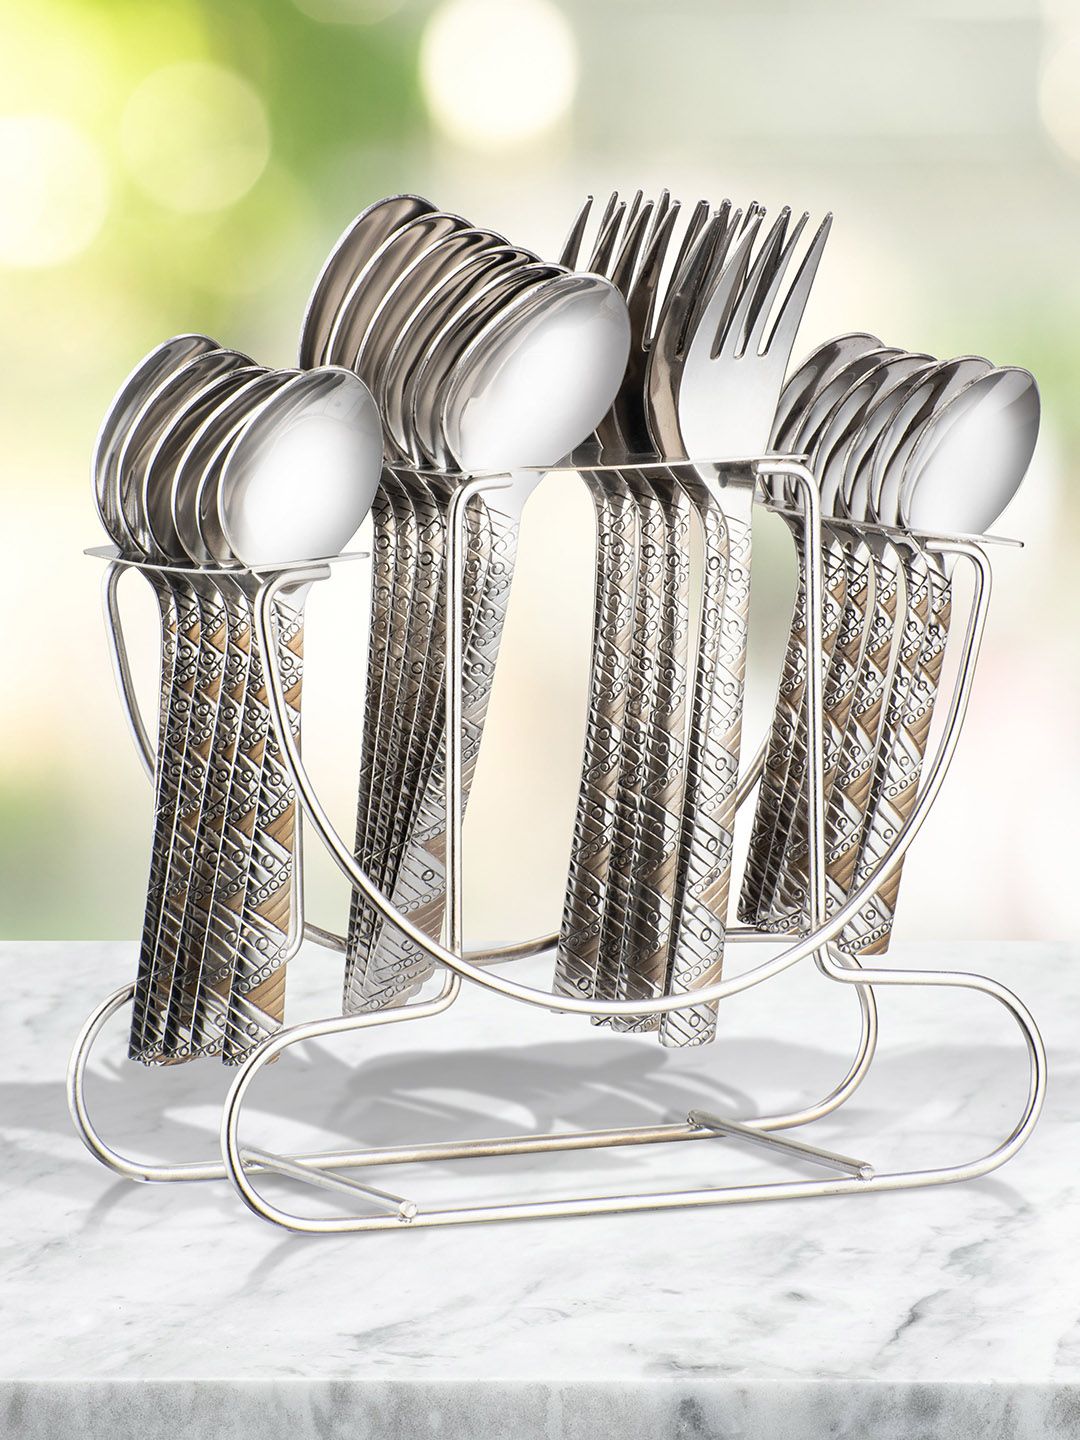 Athome by Nilkamal Set of 24 Silver-Toned Stainless Steel Cutlery With Stand Price in India